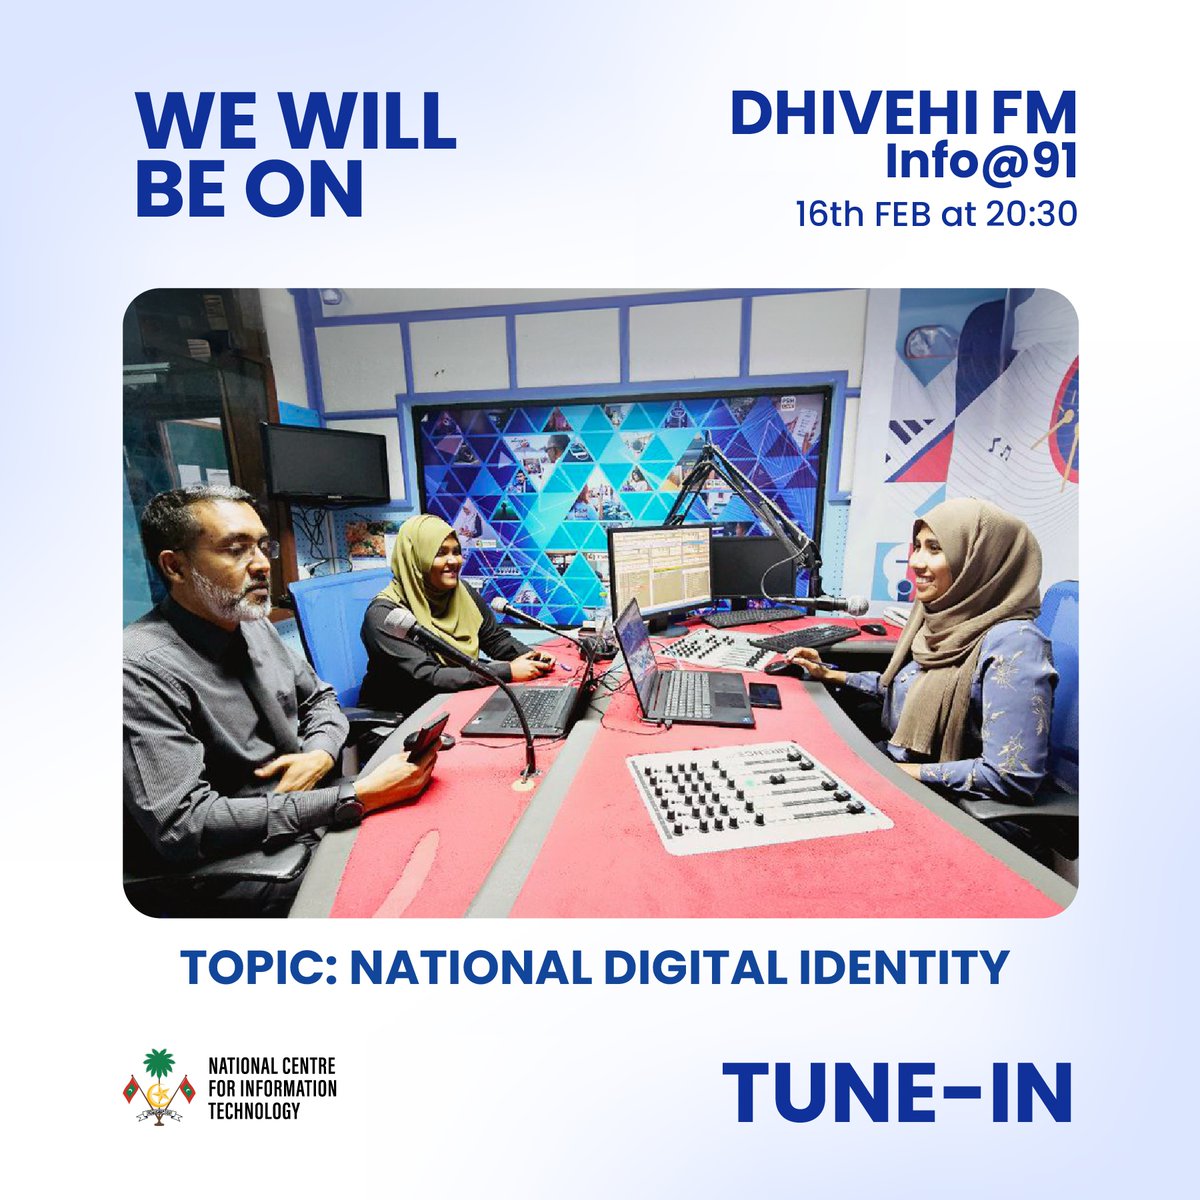 We will be on @DhivehiFM's  info@91  program at 20:30hrs on 16/02. Our HOD of Software Development Hany Nasyr & Project Coordinator Mariyam Shuha will be talking about the National Digital Identity @eFaasmv. Tune in!

#efaas #digitalidentity #DigitalMaldives #TransformGovernment